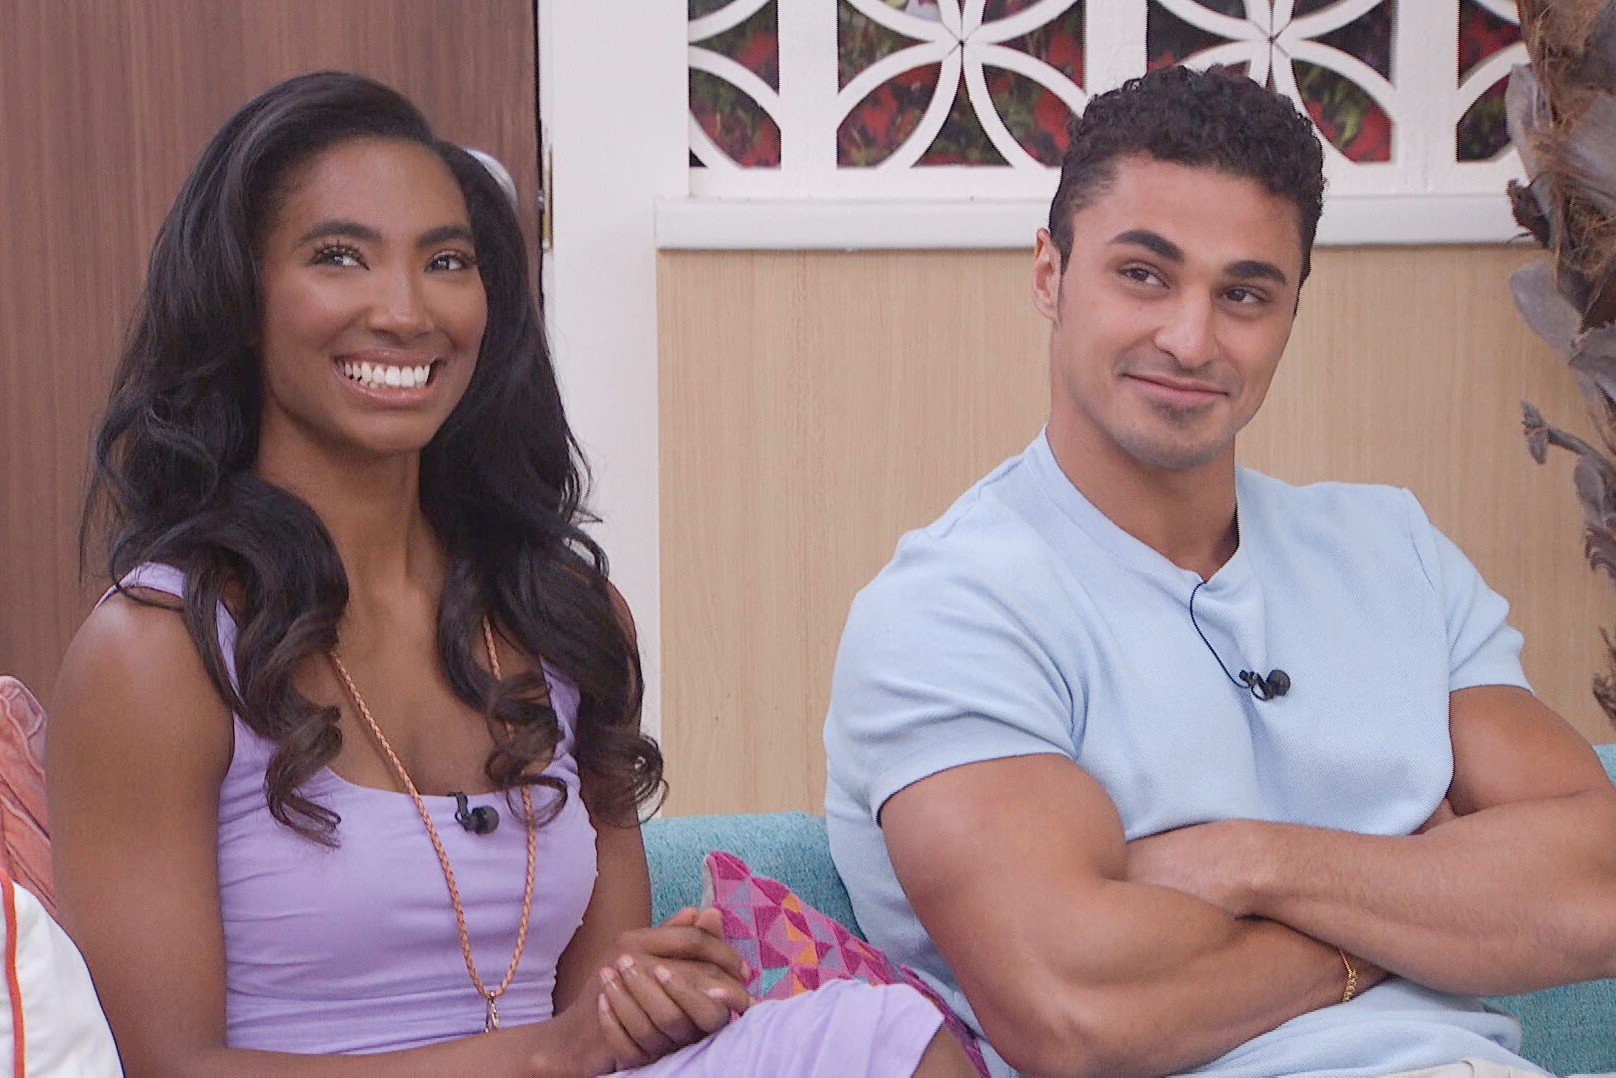 Taylor Hale and Joseph Abdin, who competed in 'Big Brother 24' on CBS, sit next to each other on the couch. Taylor wears a light purple dress. Joseph wears a light blue shirt.